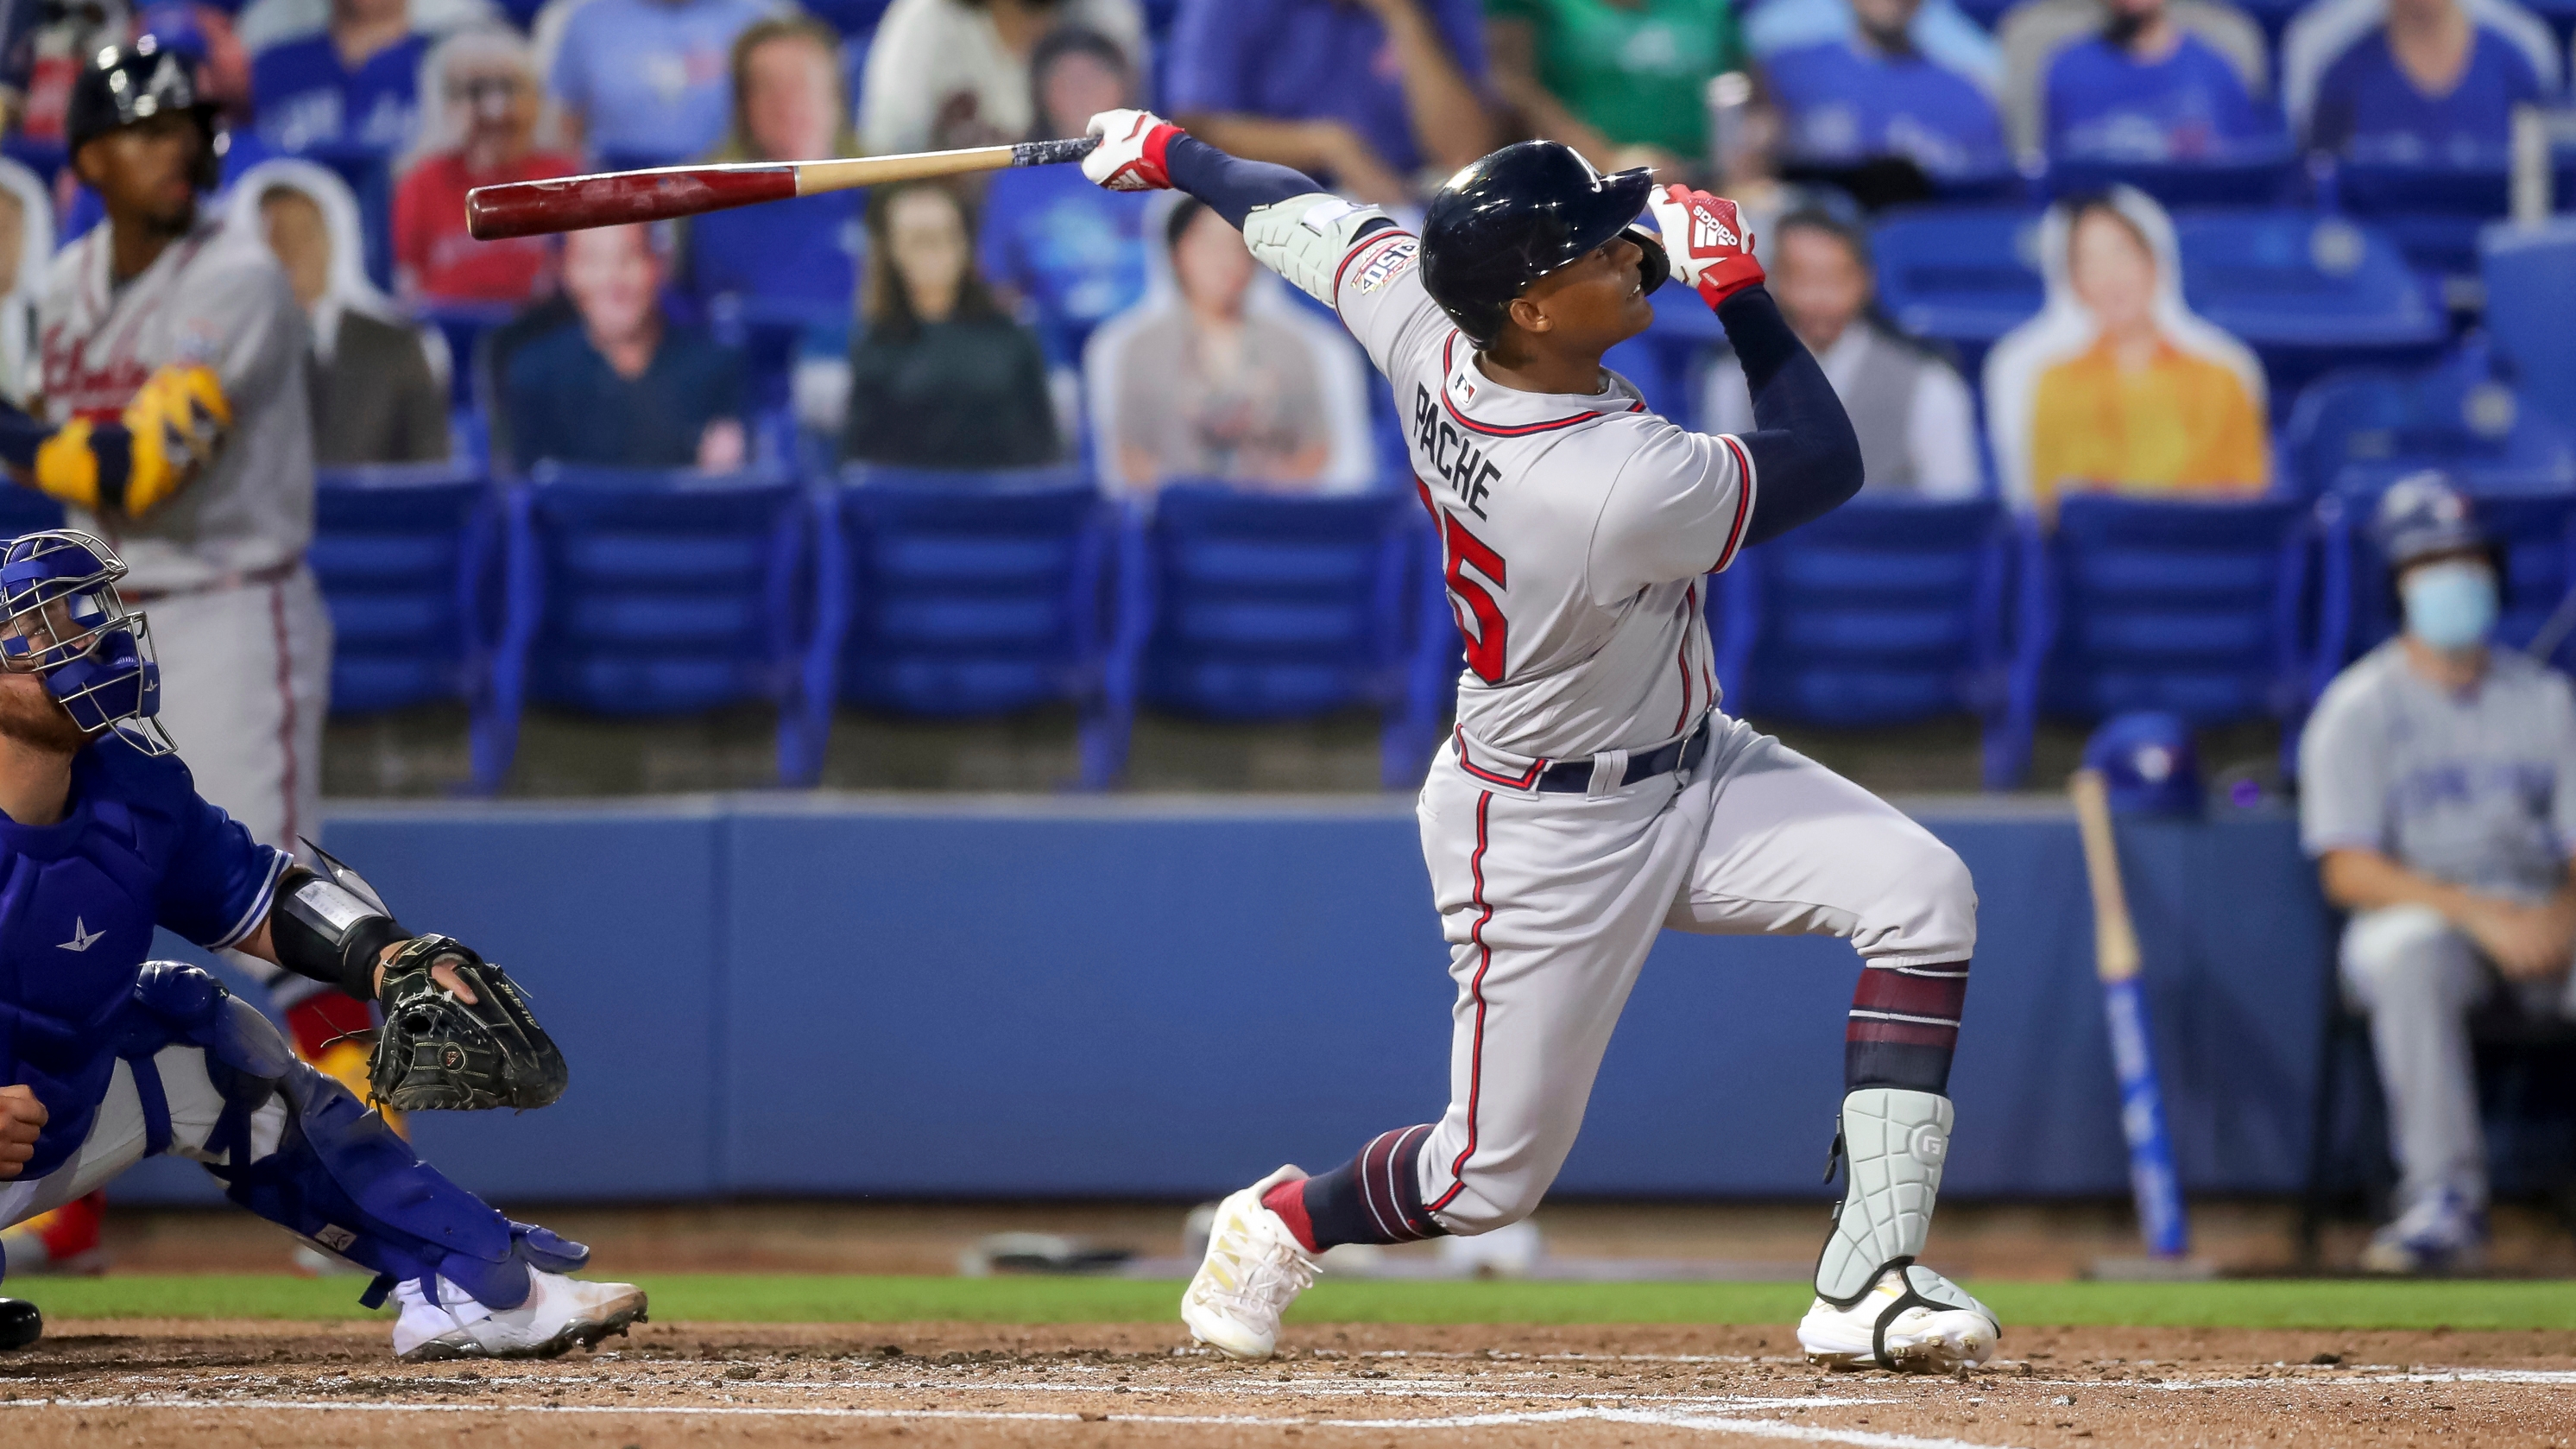 Cristian Pache is ready to stand out, even in the Atlanta Braves